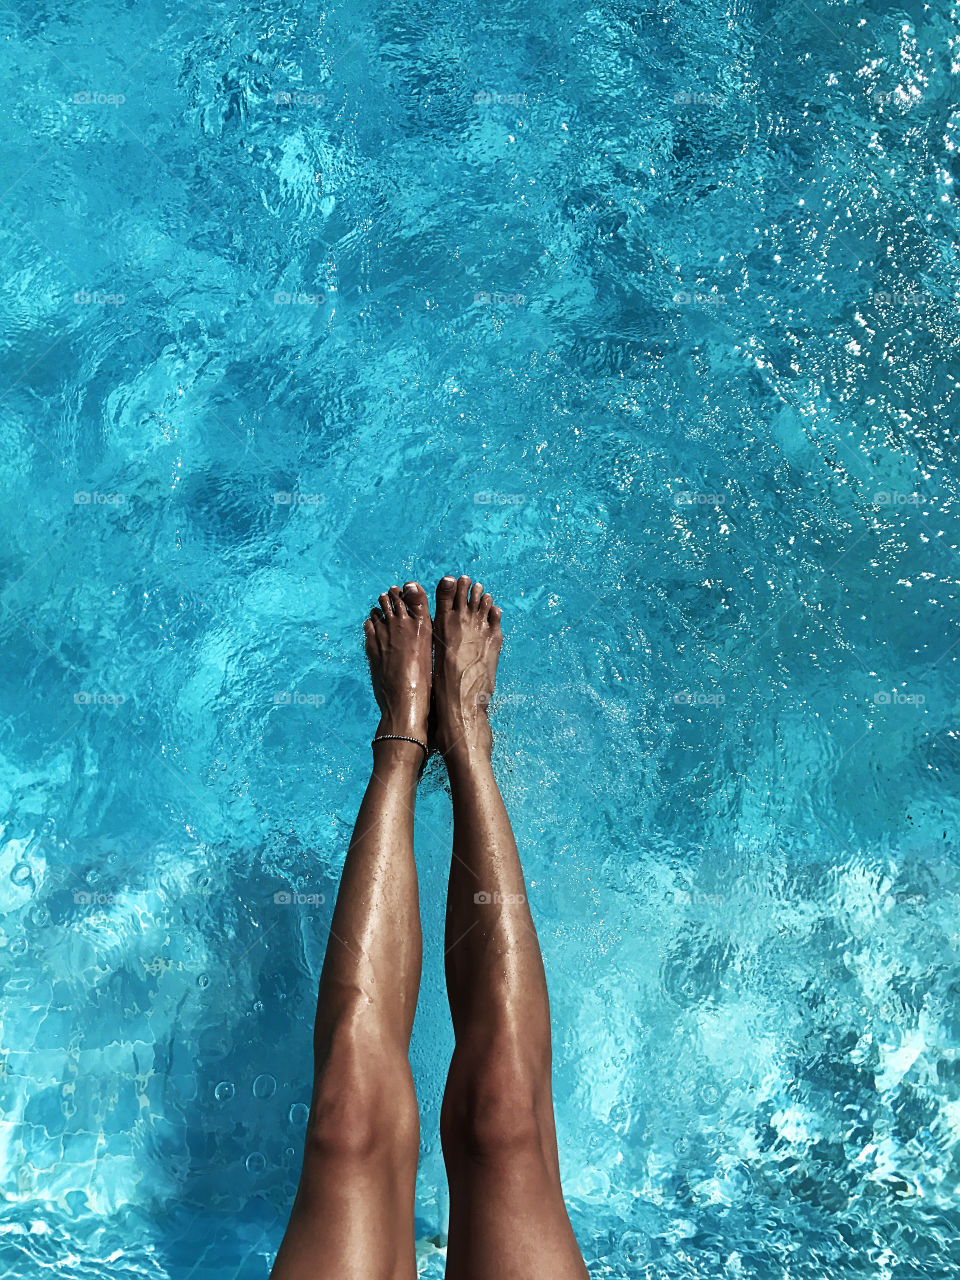 Female feet under the blue water of swimming pool 